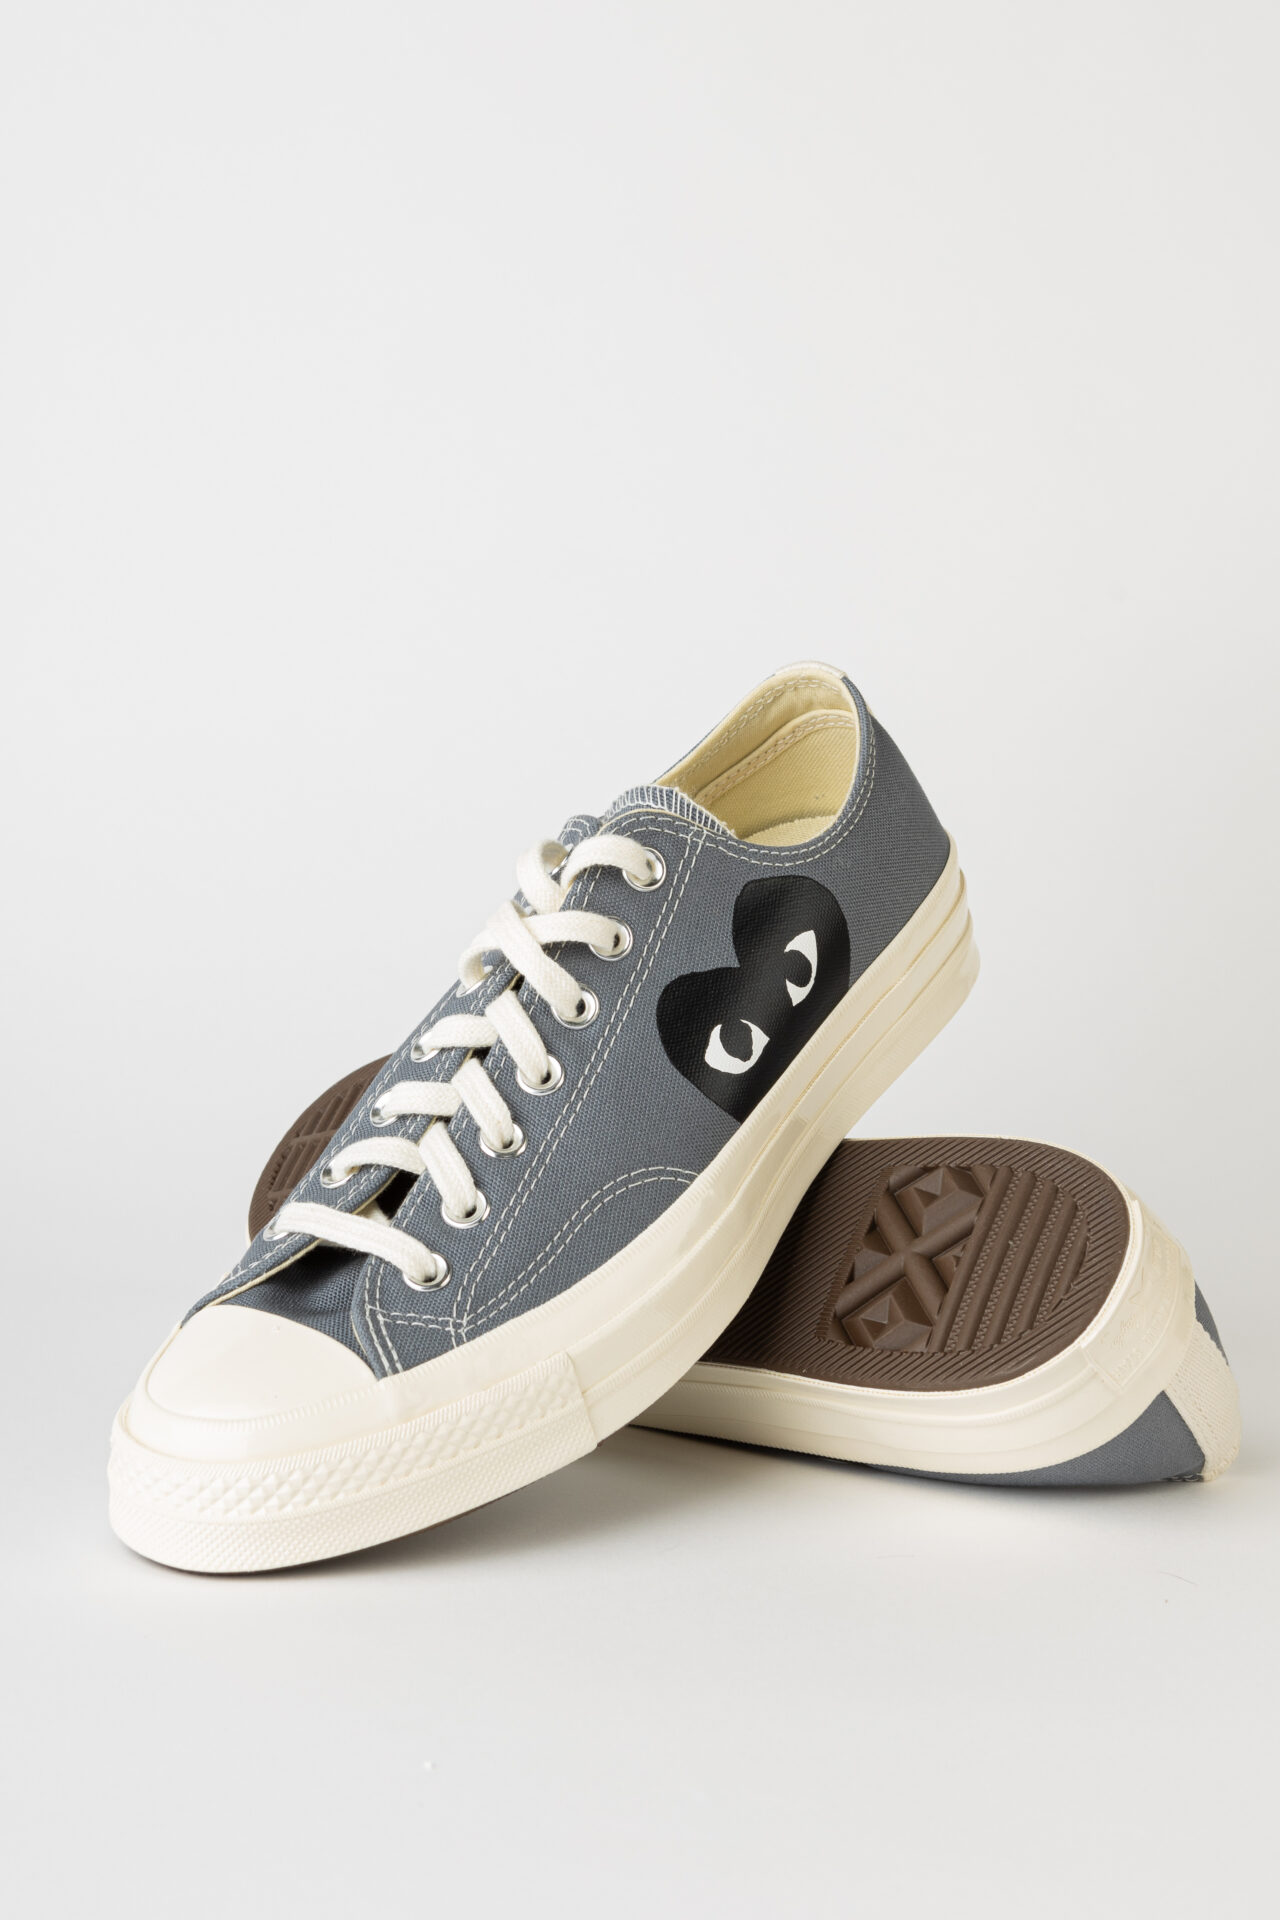 Comme Des Garcons Play - Grey Converse Chuck Taylor Low Top - Schwittenberg